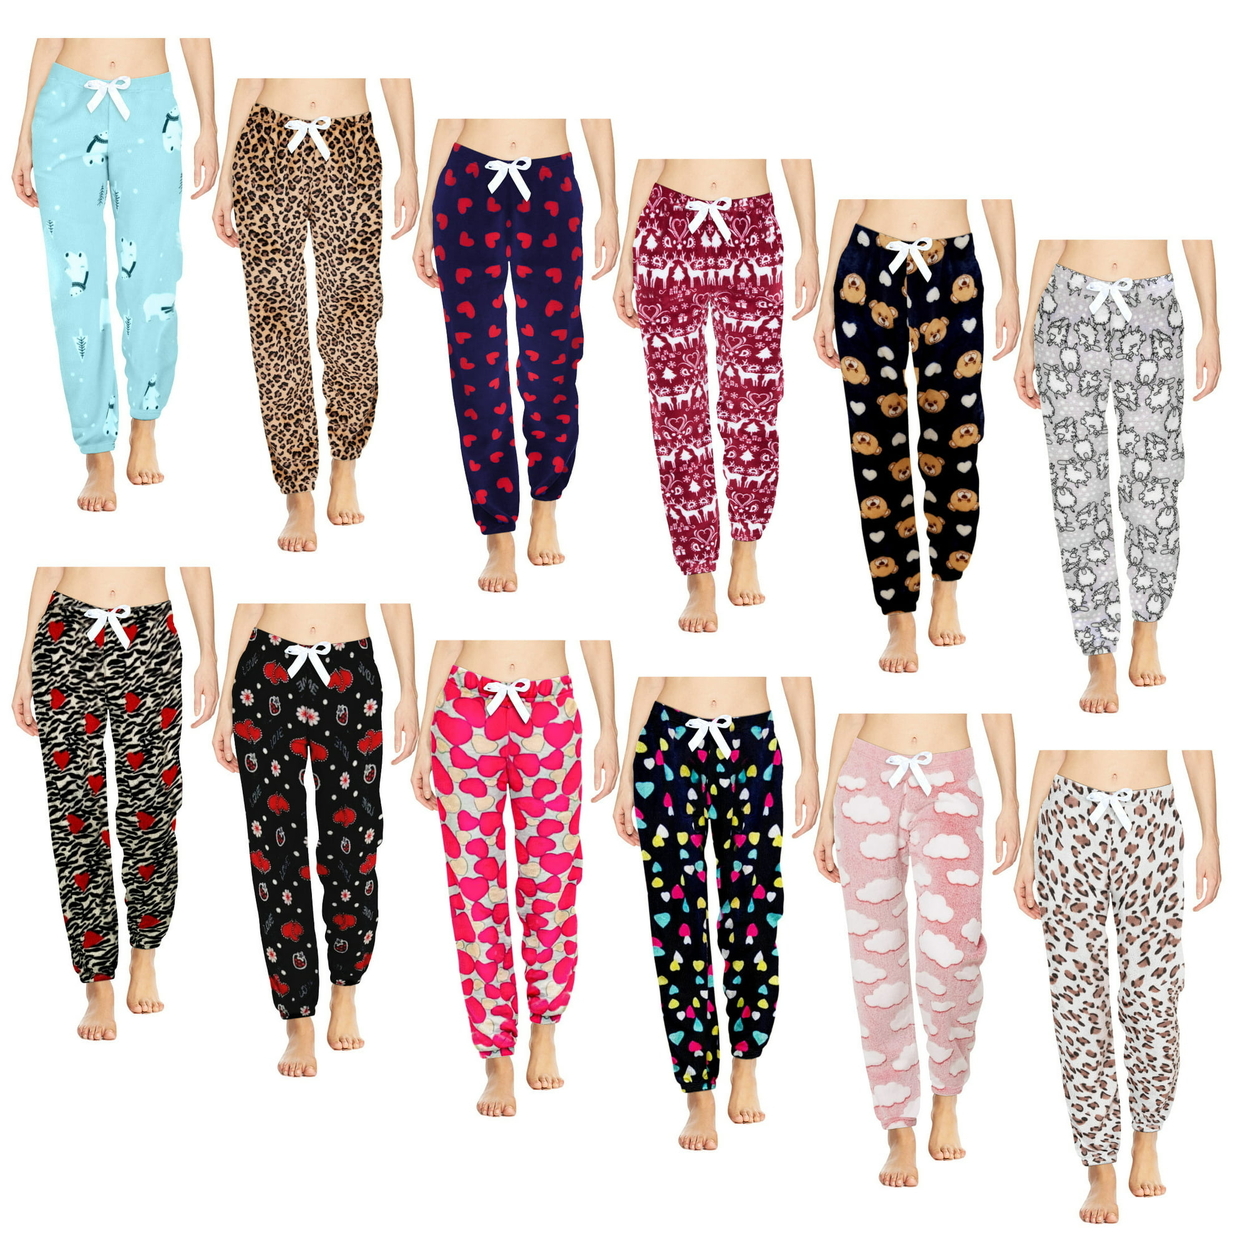 Multi-Pack: Women's Printed Ultra-Soft Comfy Stretch Micro-Fleece Pajama Lounge Pants - 3-pack, Animal, Large